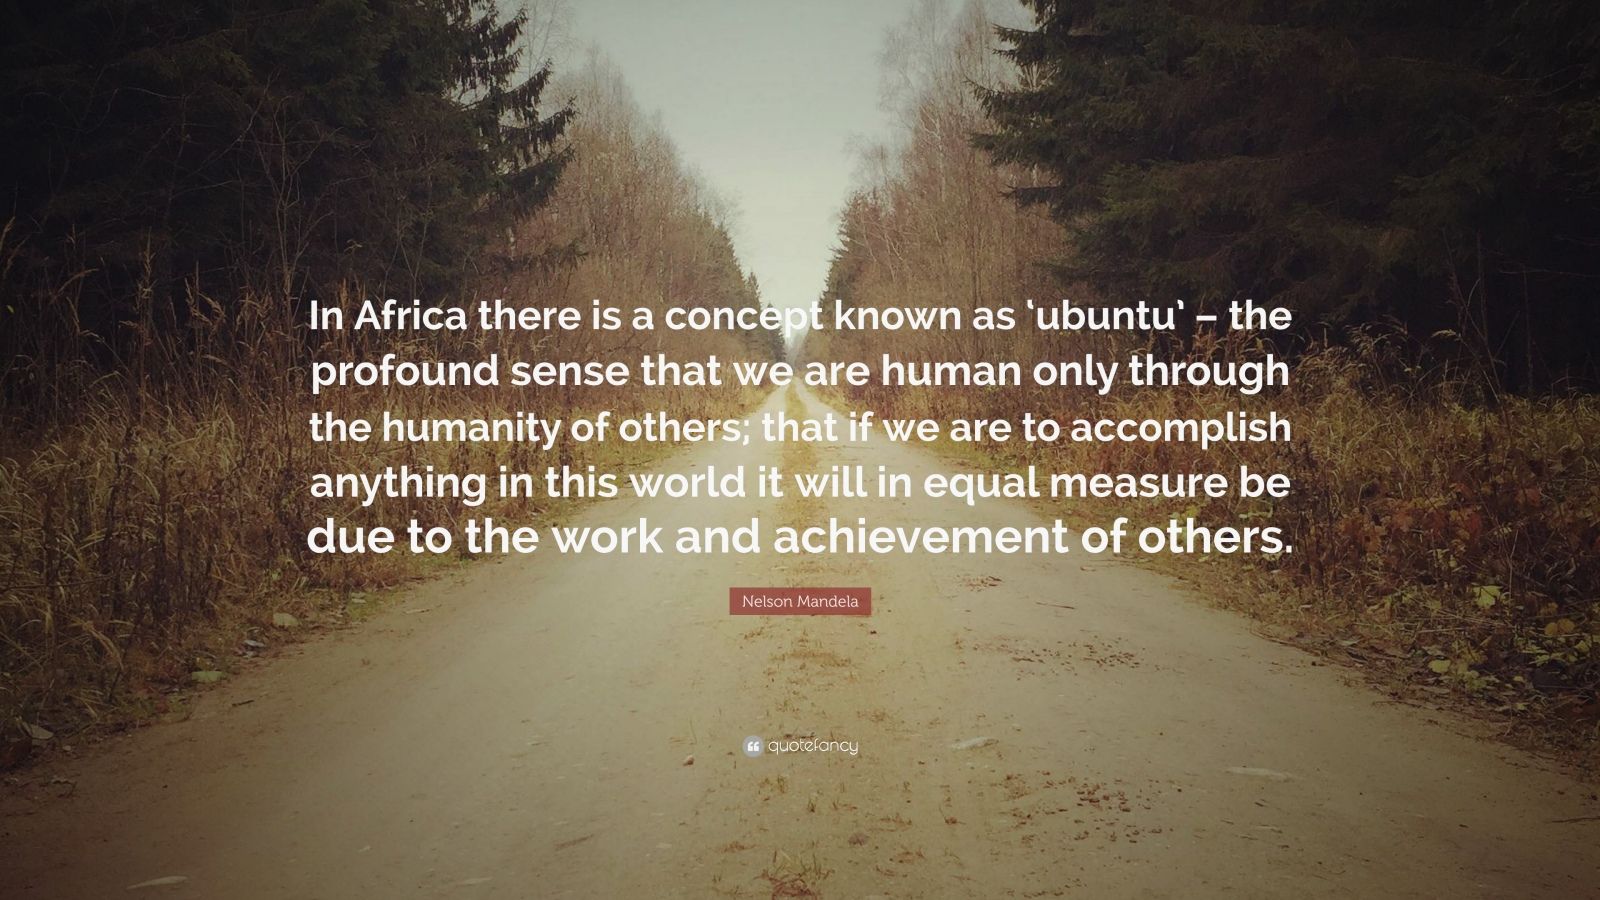 Nelson Mandela Quote: “In Africa there is a concept known as ‘ubuntu